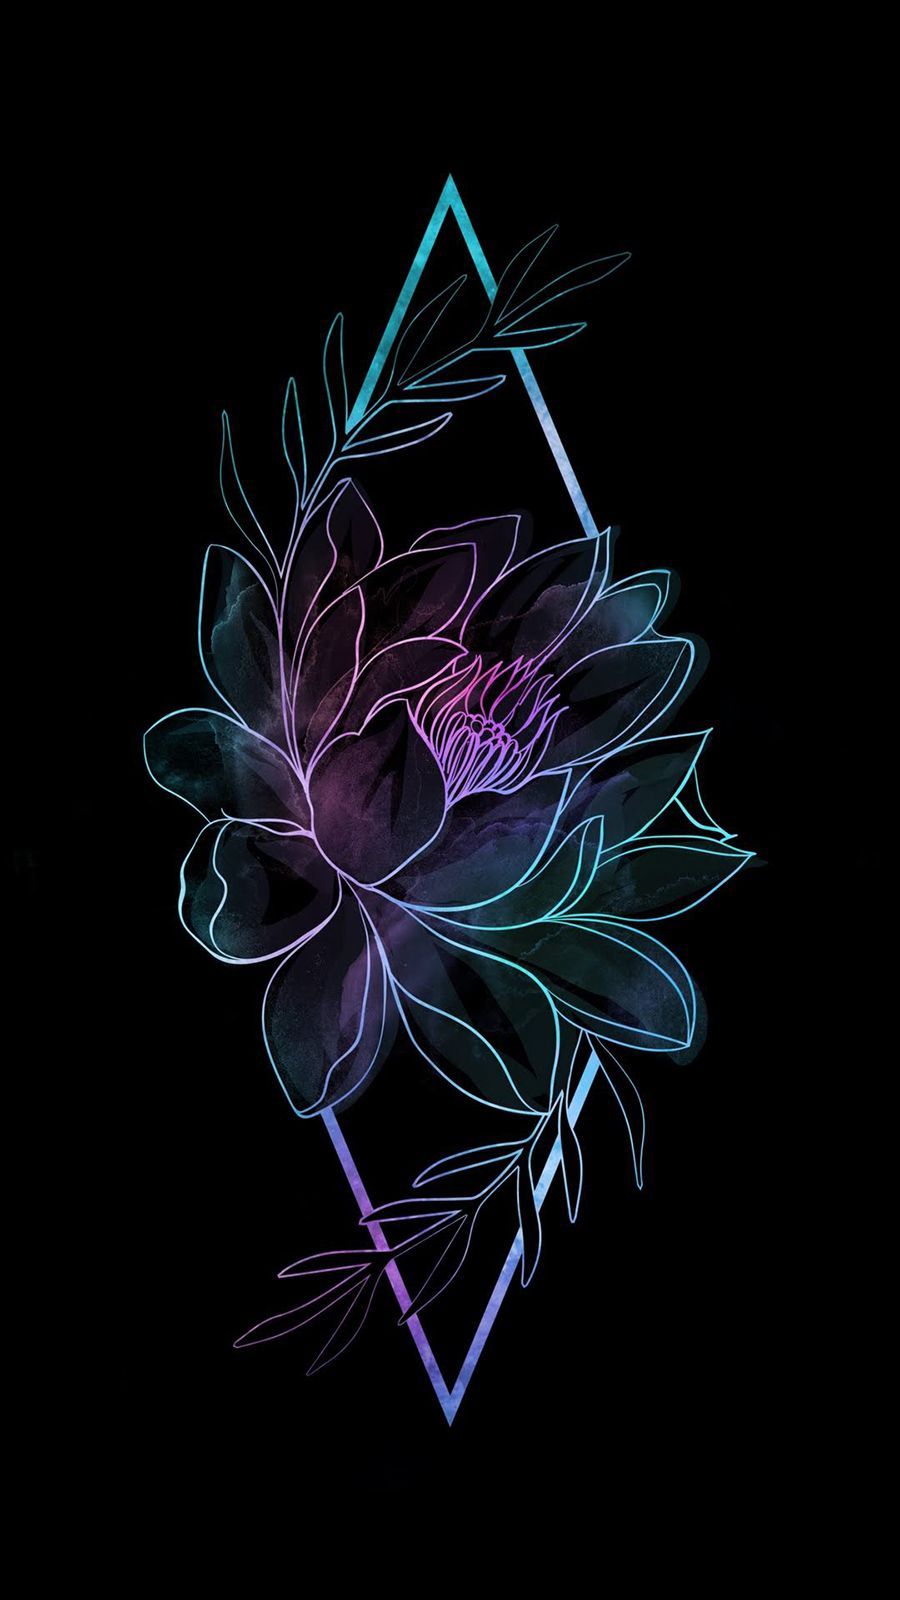 70 Artistic Neon HD Wallpapers and Backgrounds